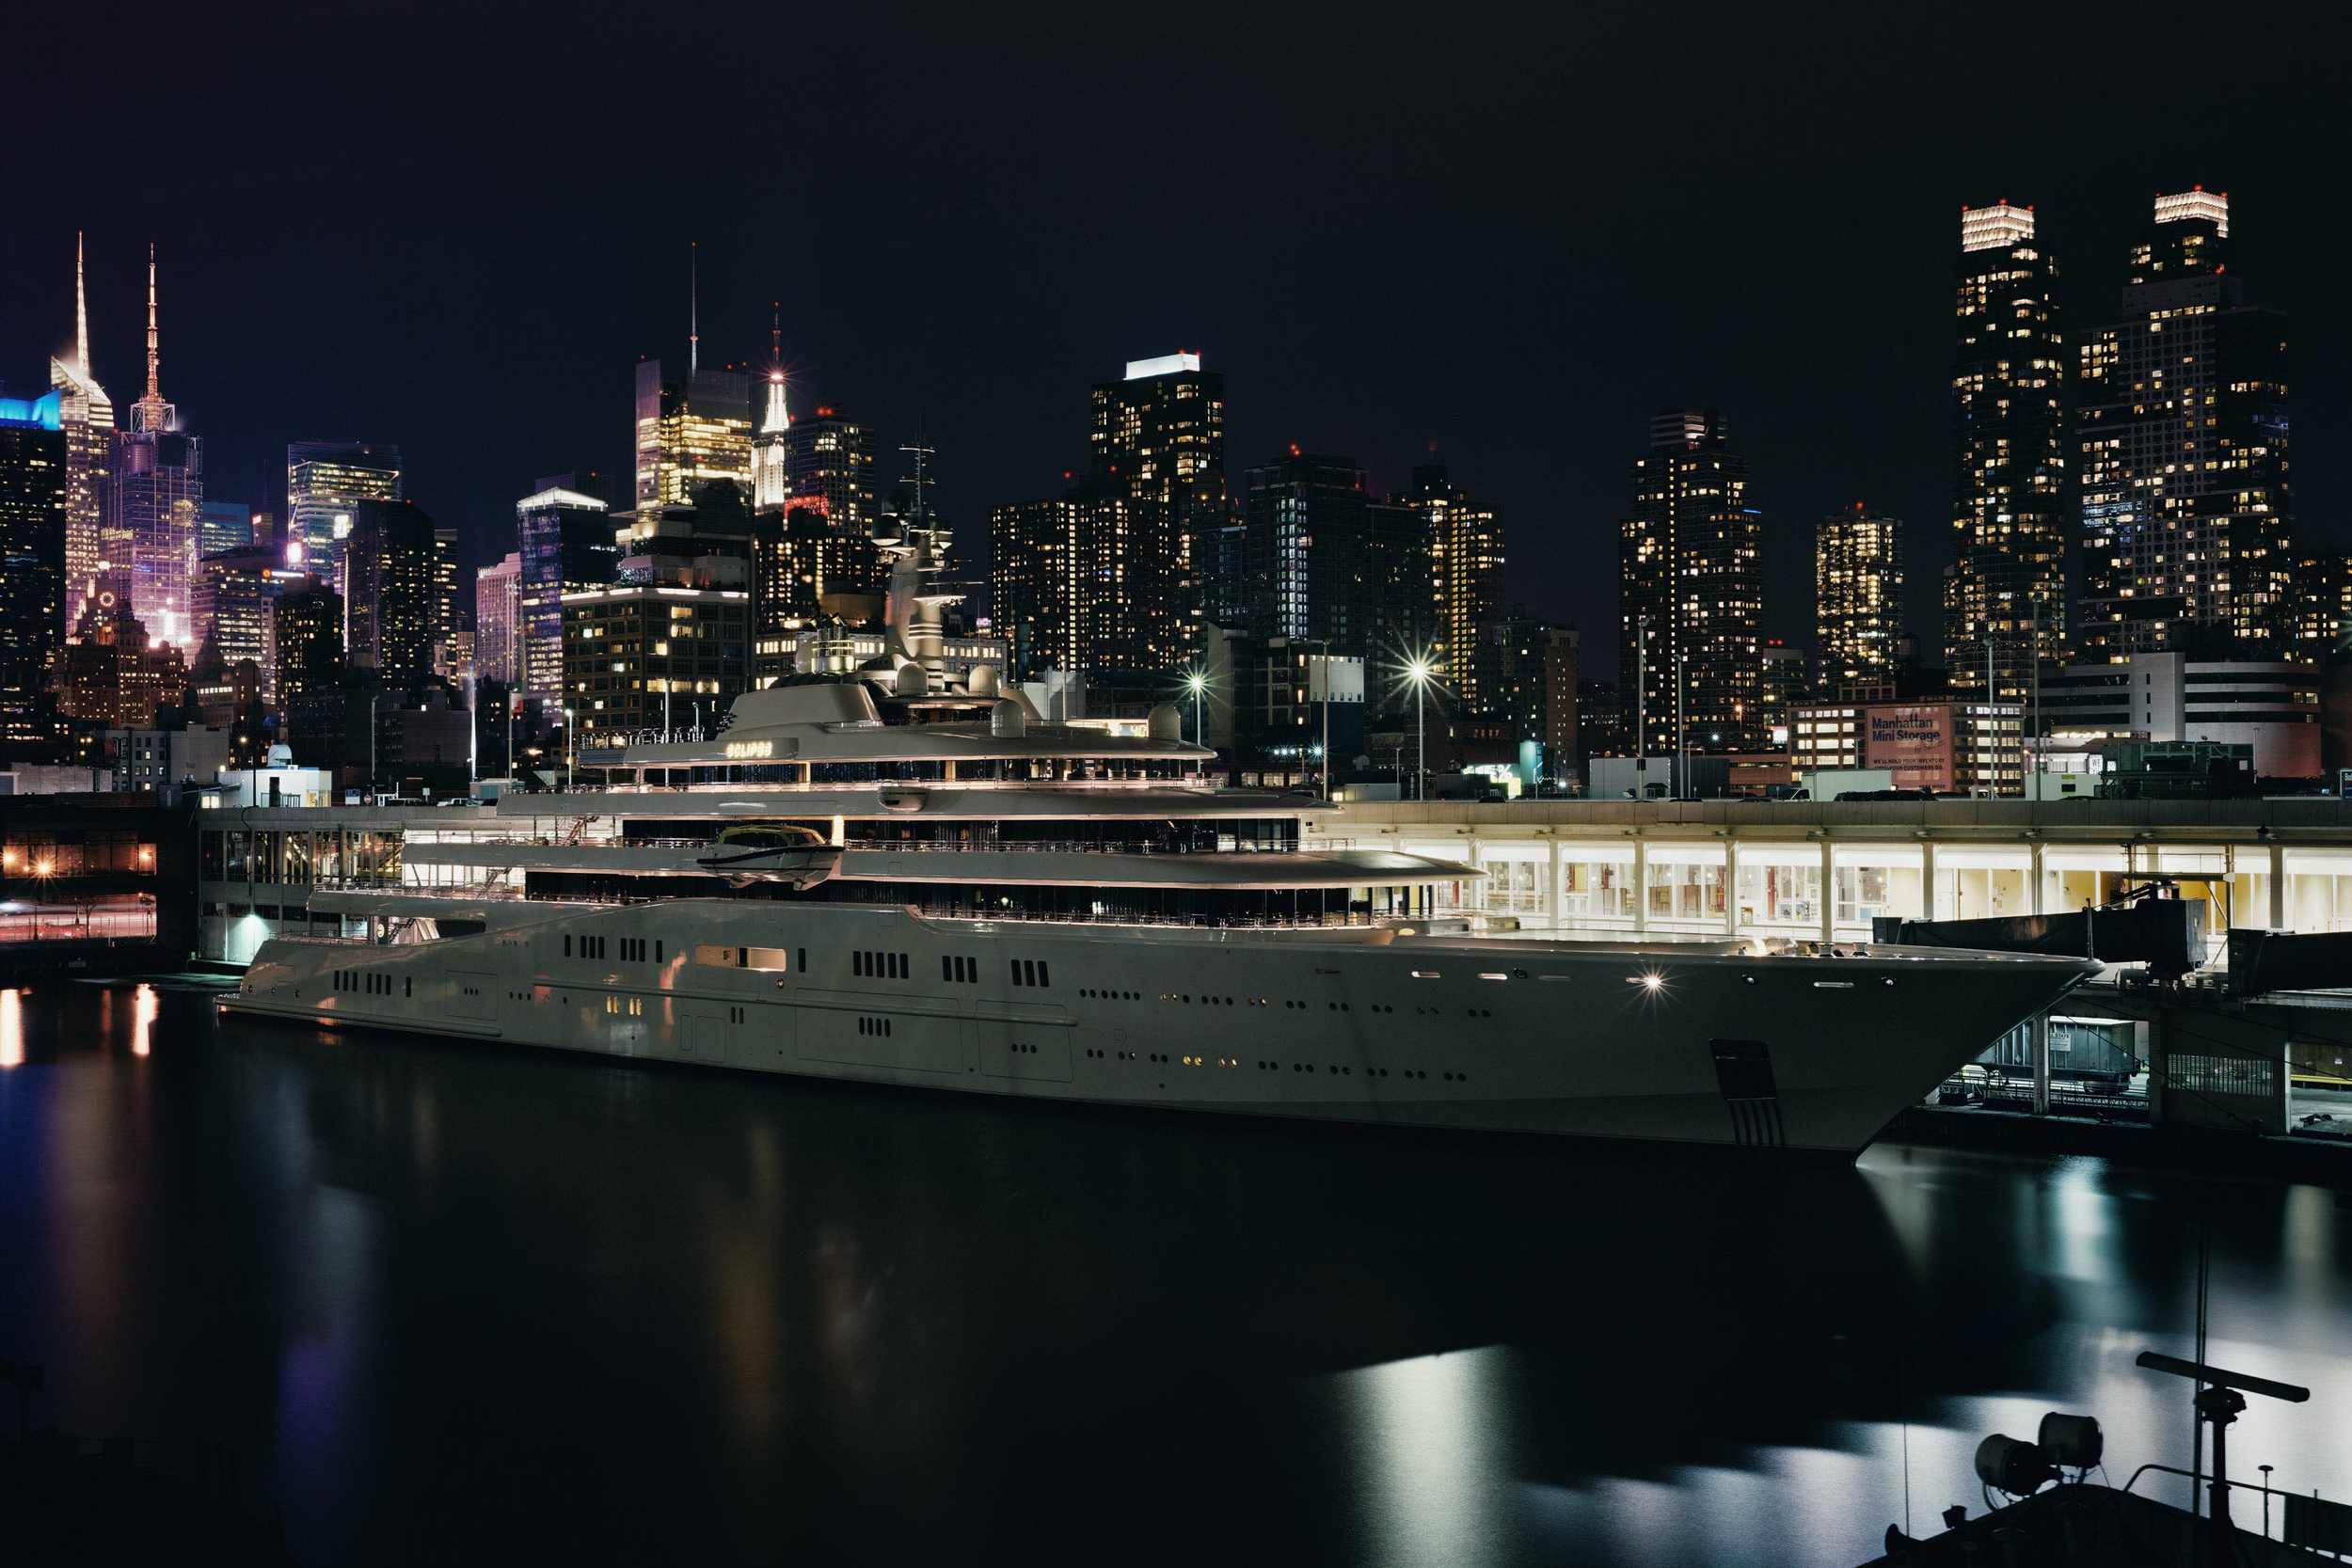 The Eclipse, a Yacht Belonging to Russian Oligarch Roman Abramovich, New York City